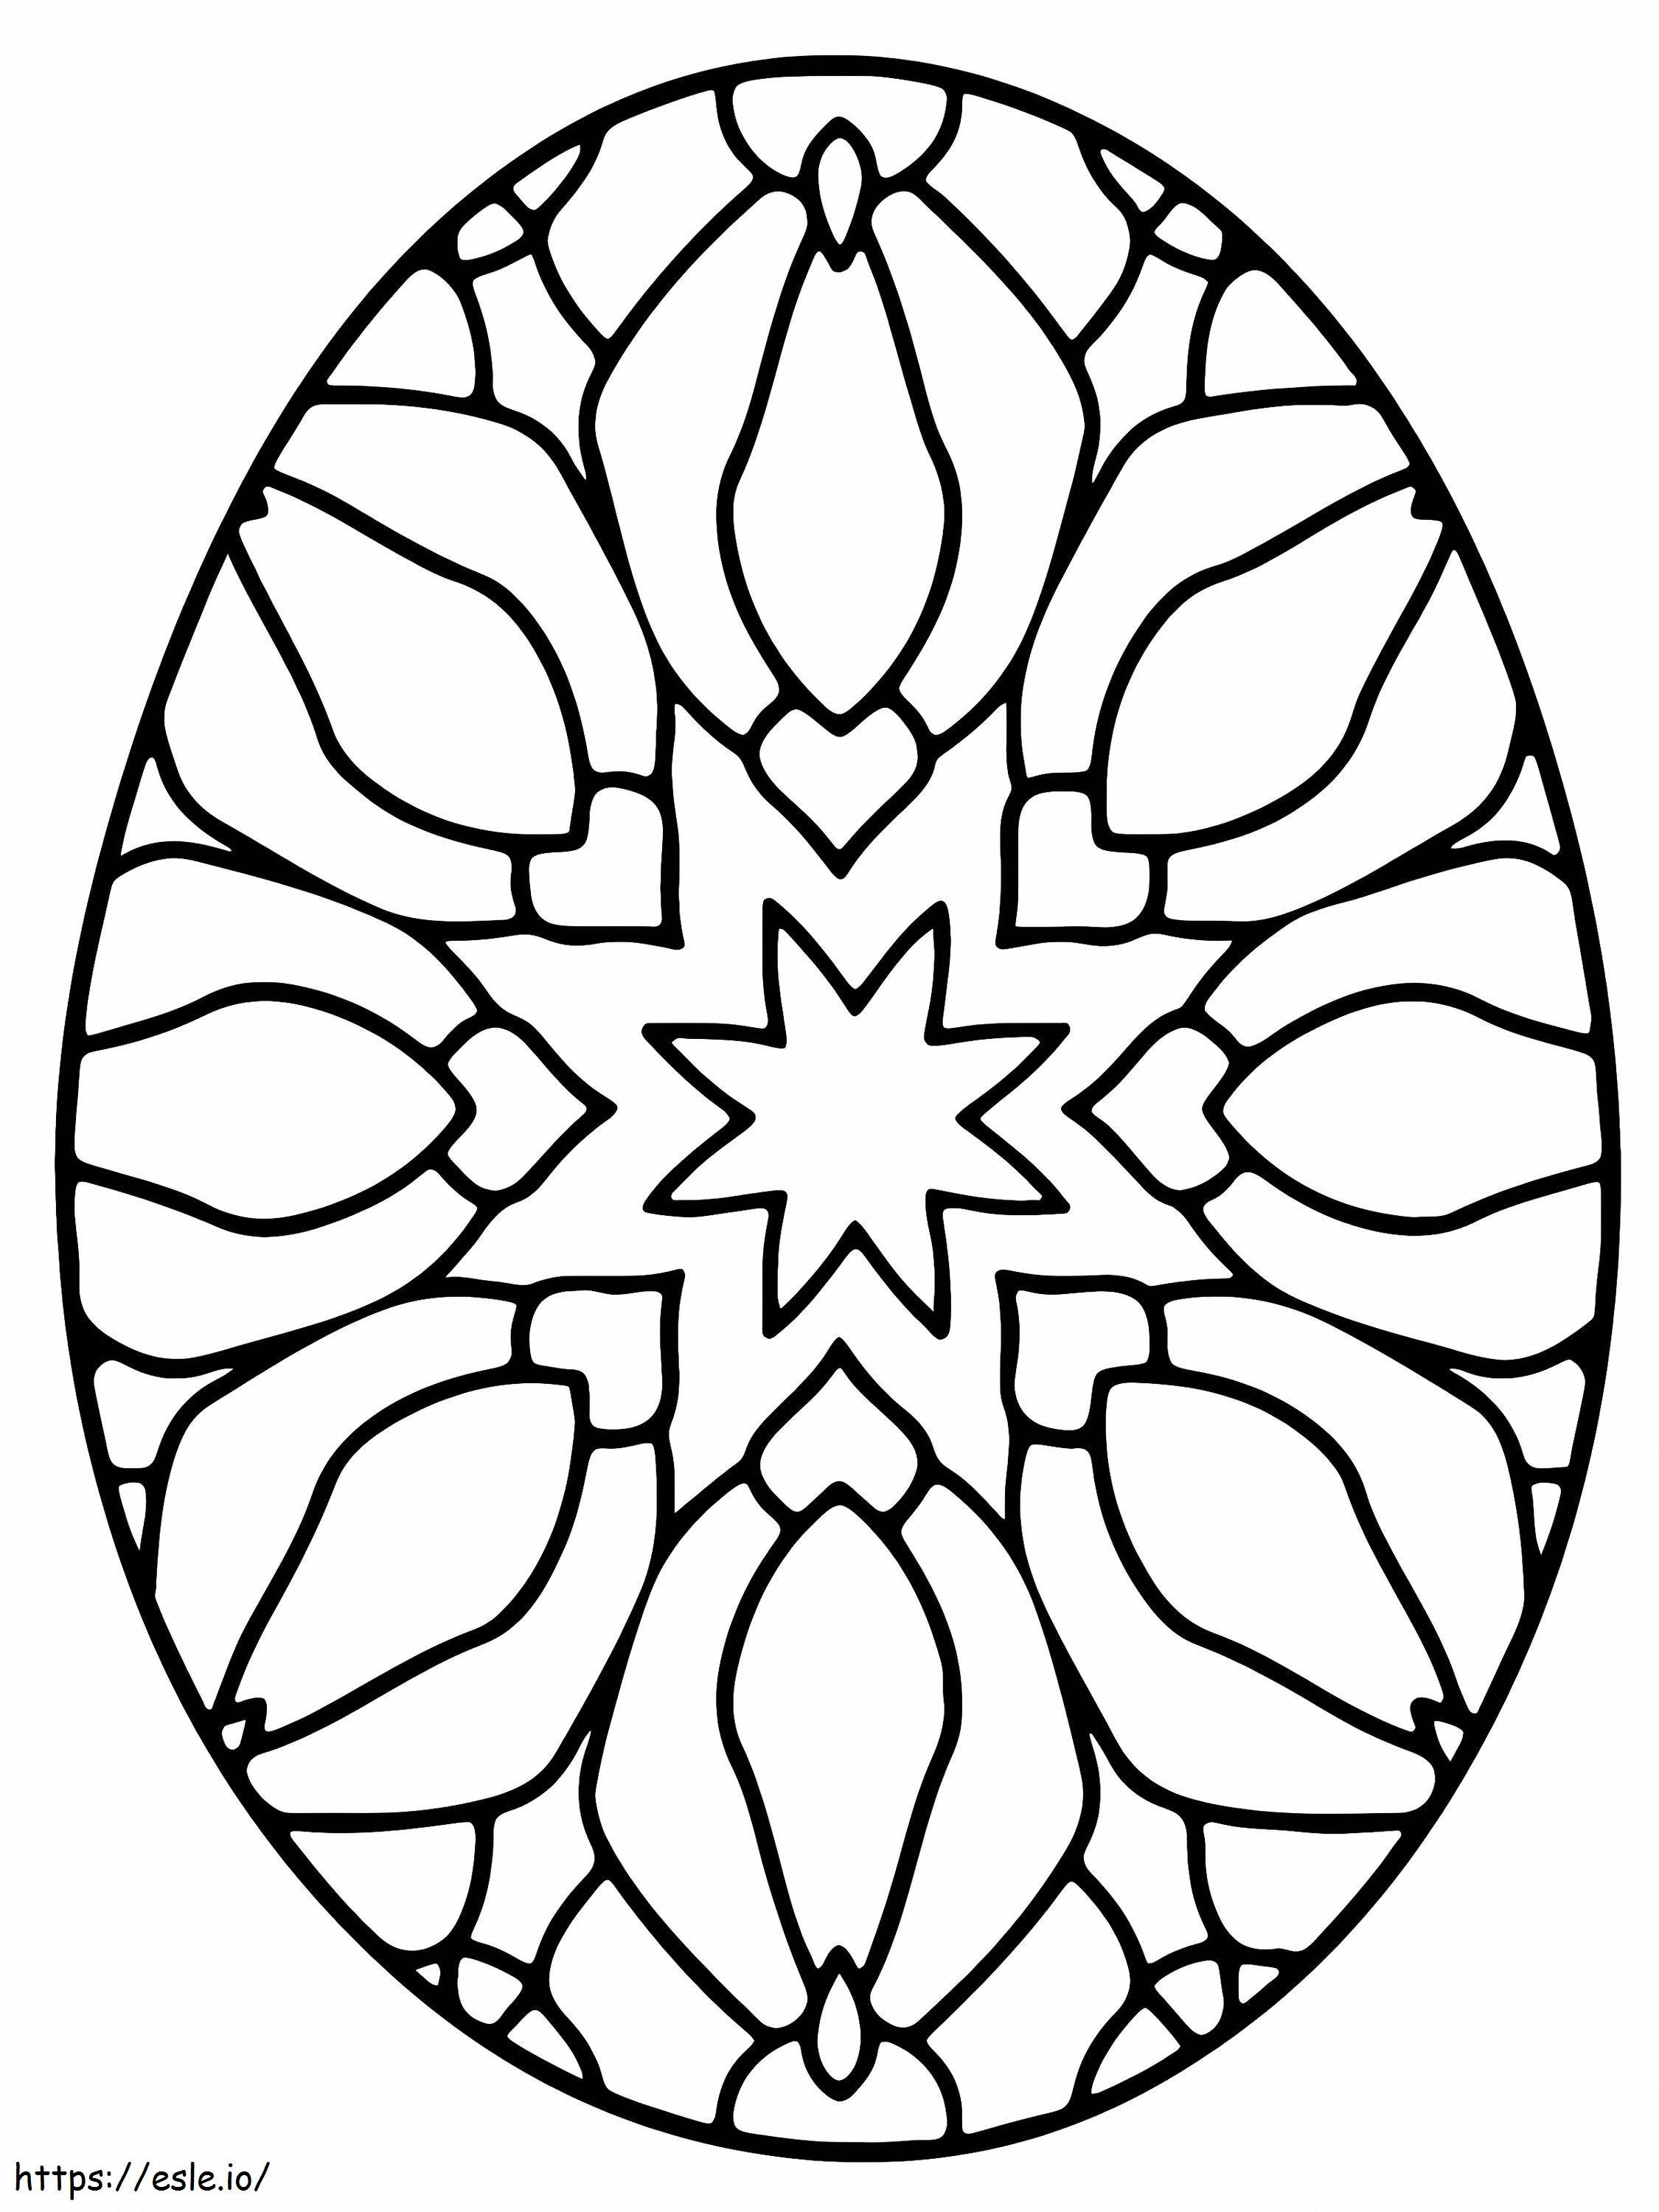 Grand Easter Egg coloring page